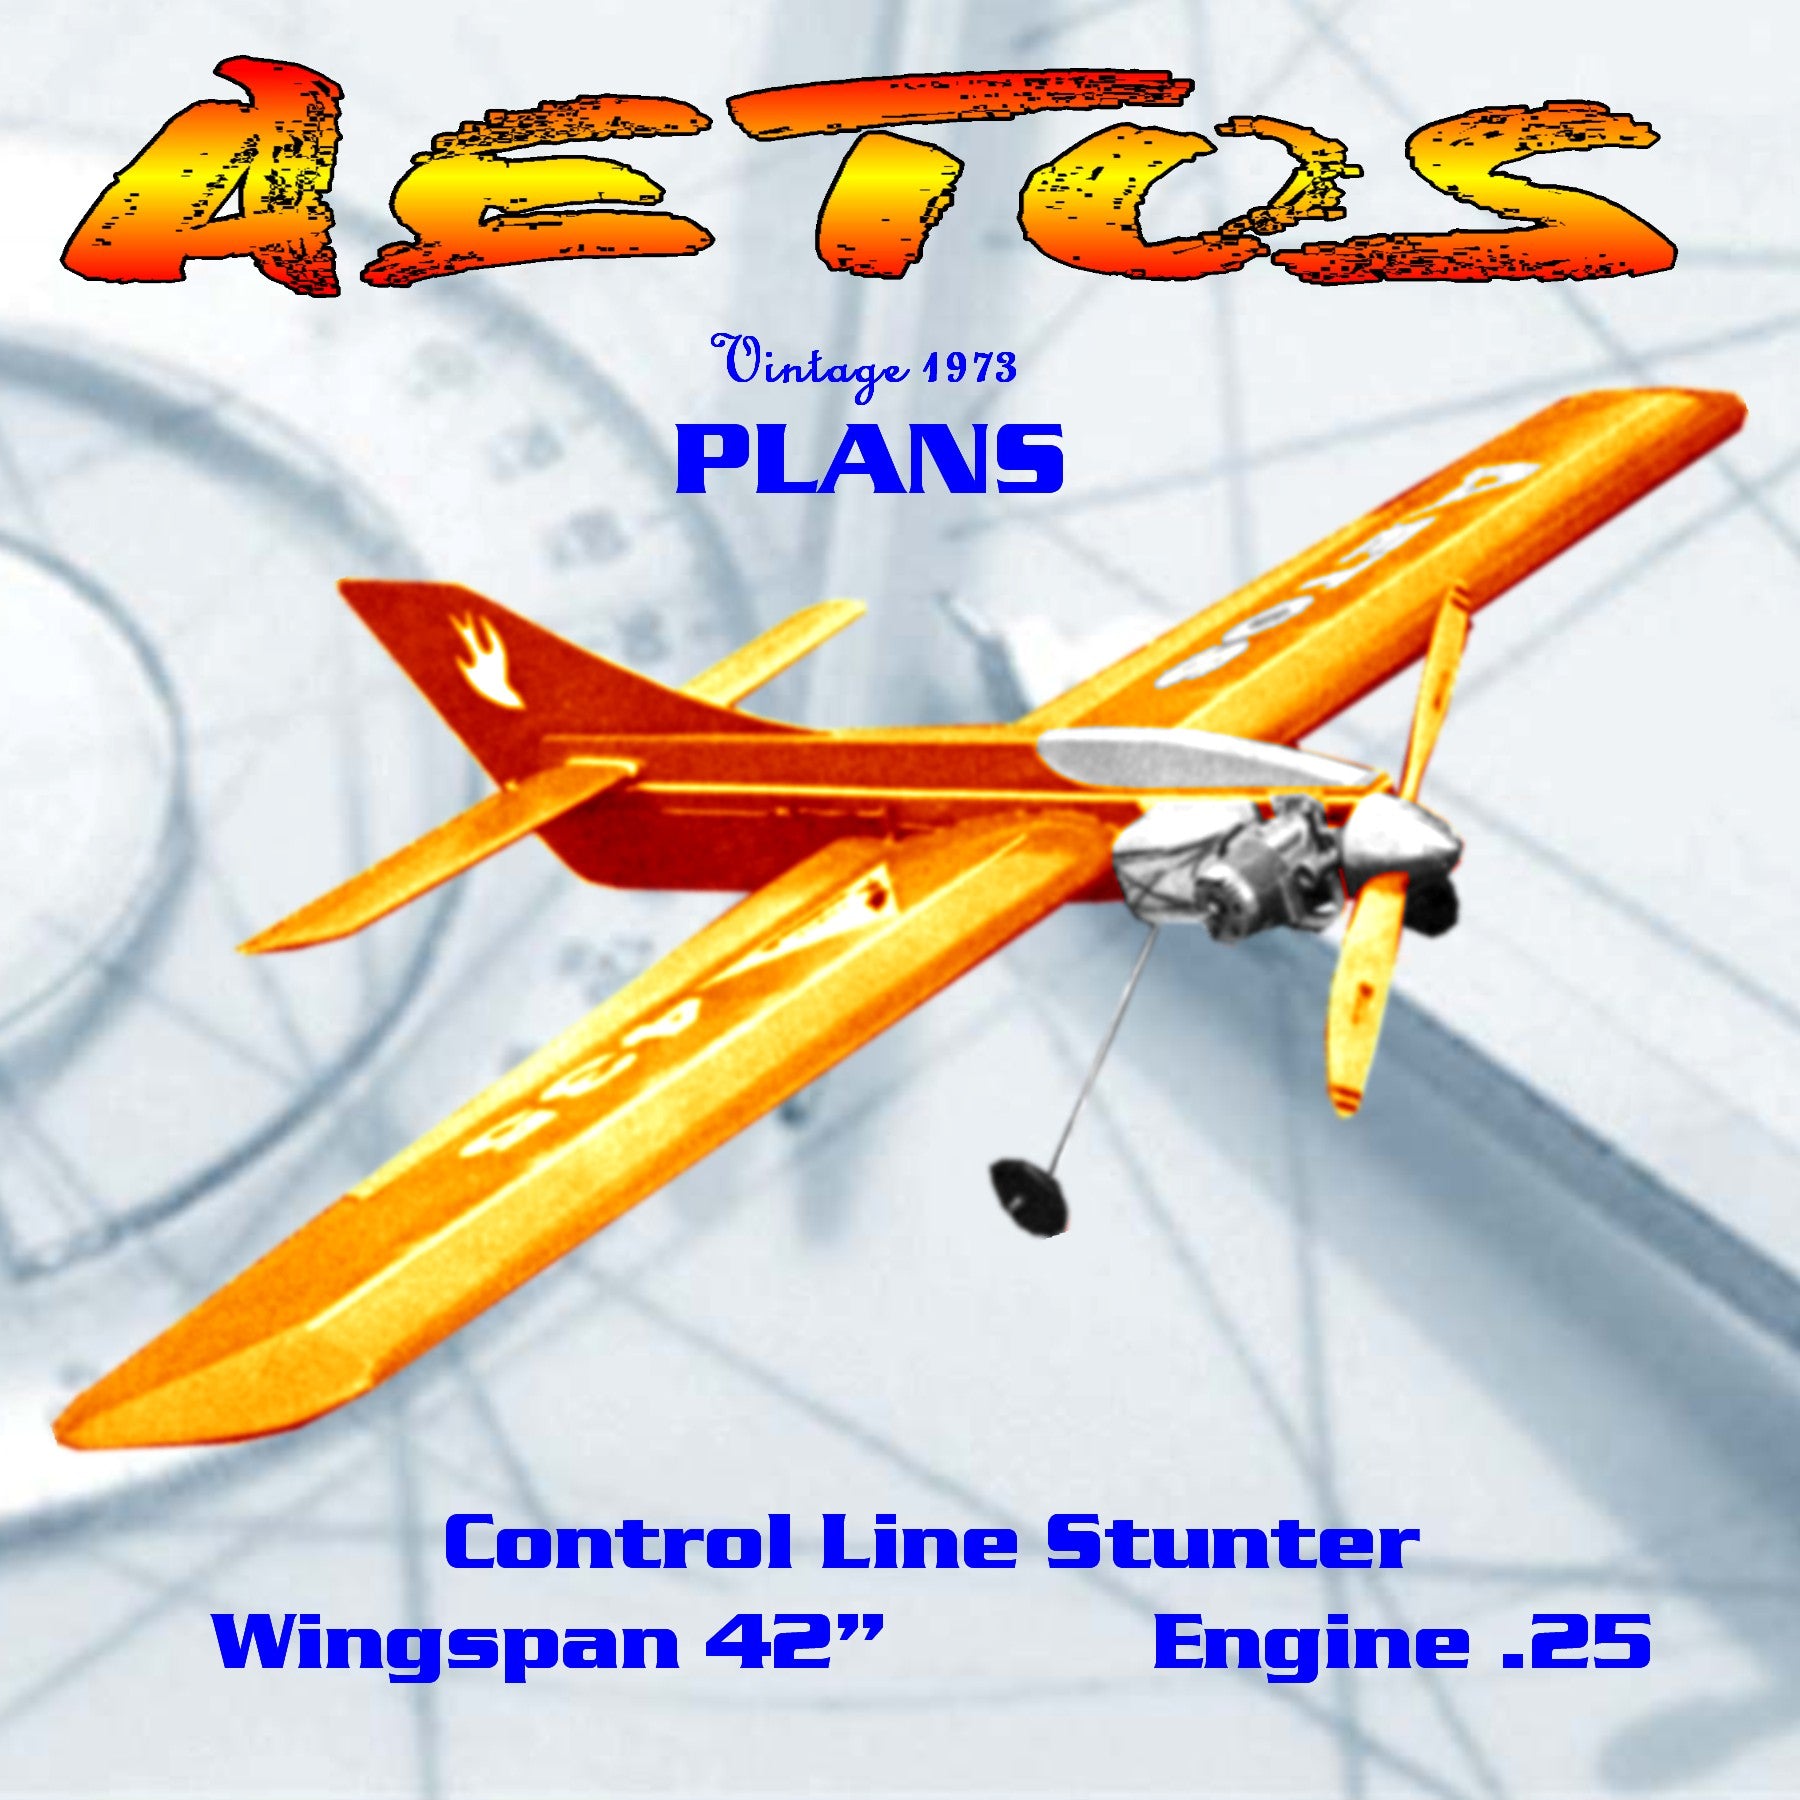 printed plan vintage 1973 control line stunter "aetos" profile look does not stop its performance.